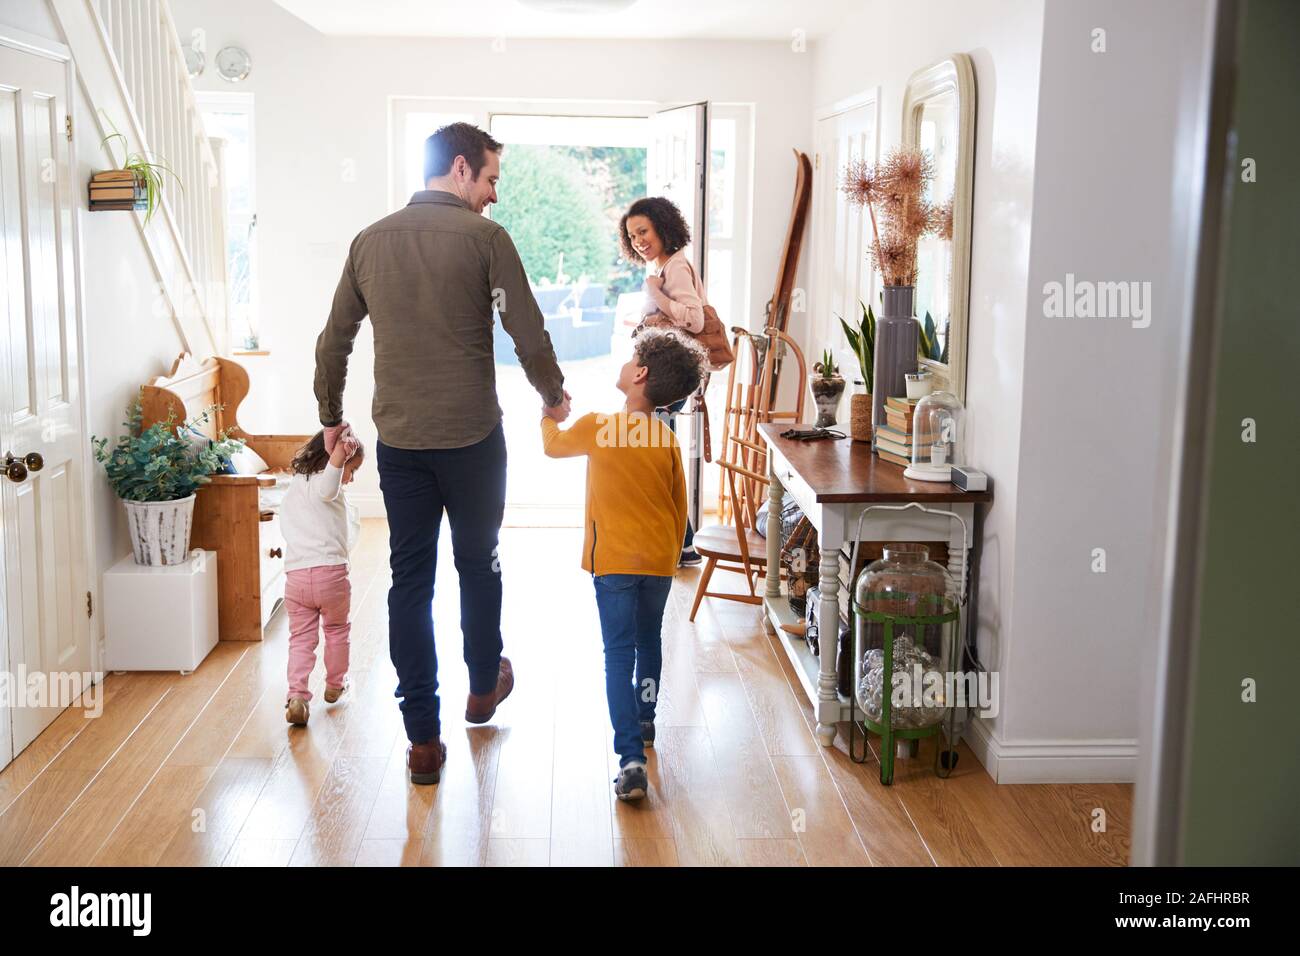 Rear View Of Family Leaving Home On Trip Out With Excited Children Stock Photo